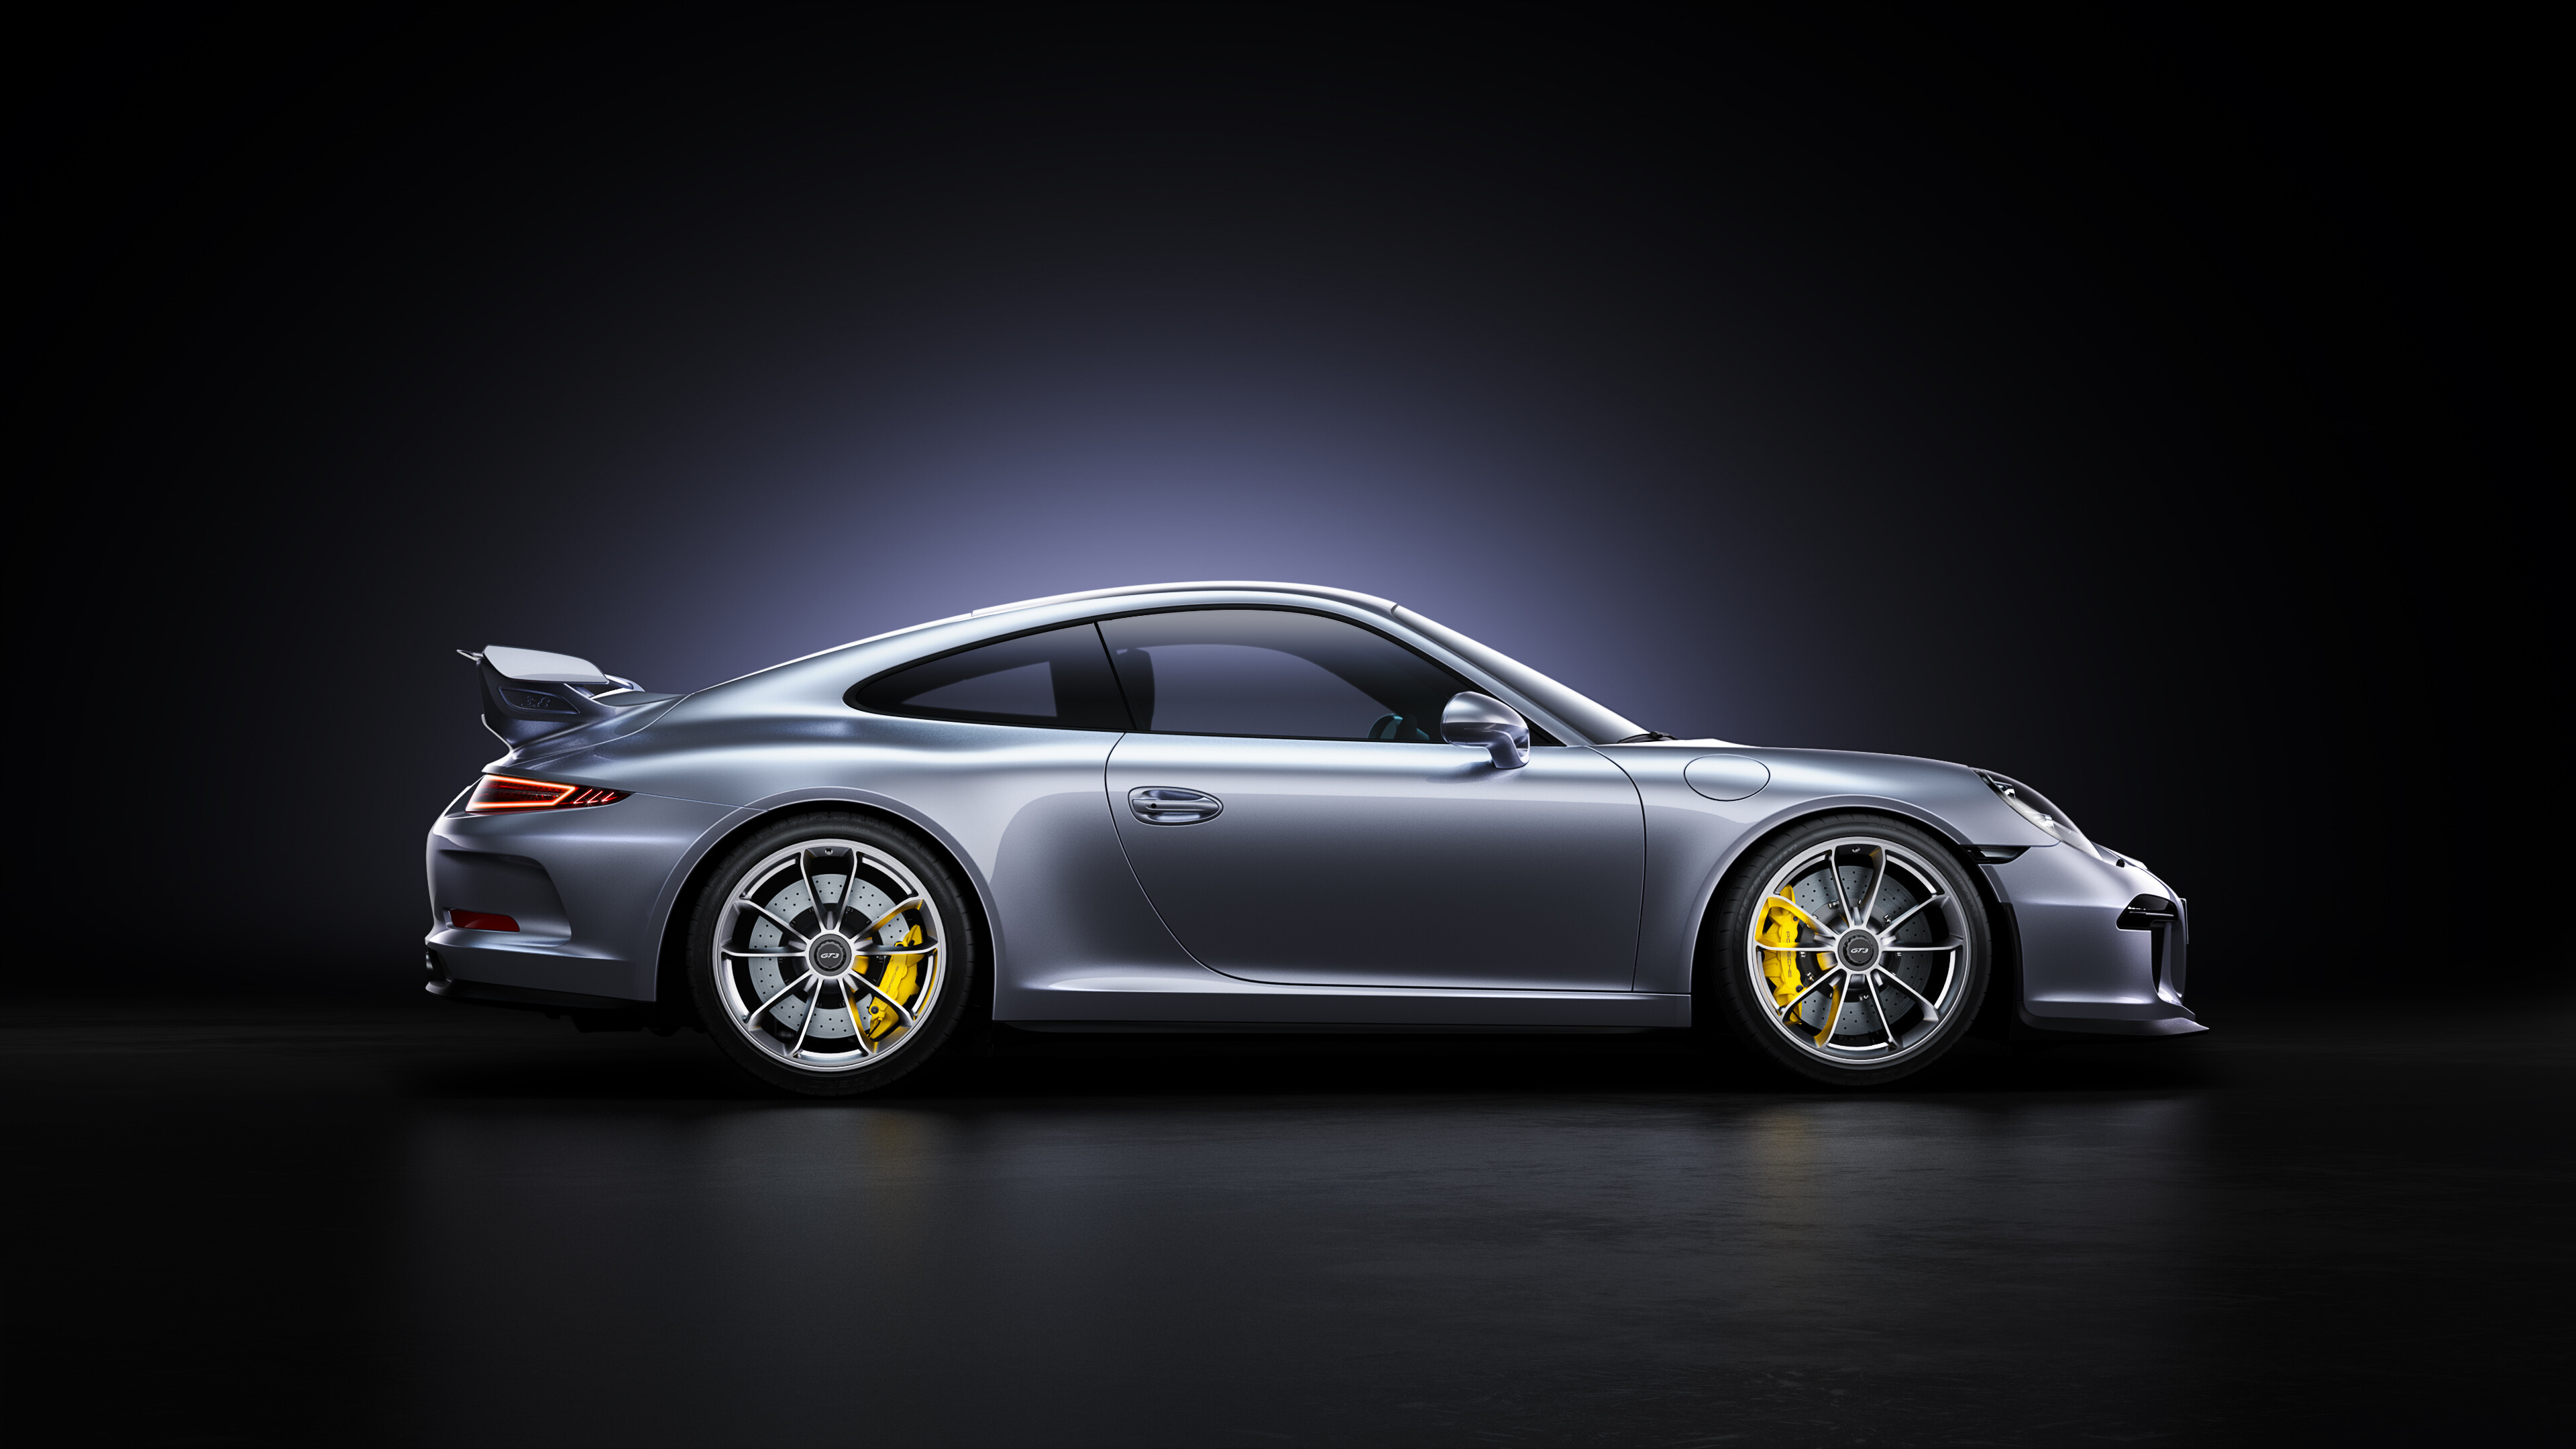 Porsche: It is a line of high-performance models, which began with the 1973 911 Carrera RS. 3840x2160 4K Background.